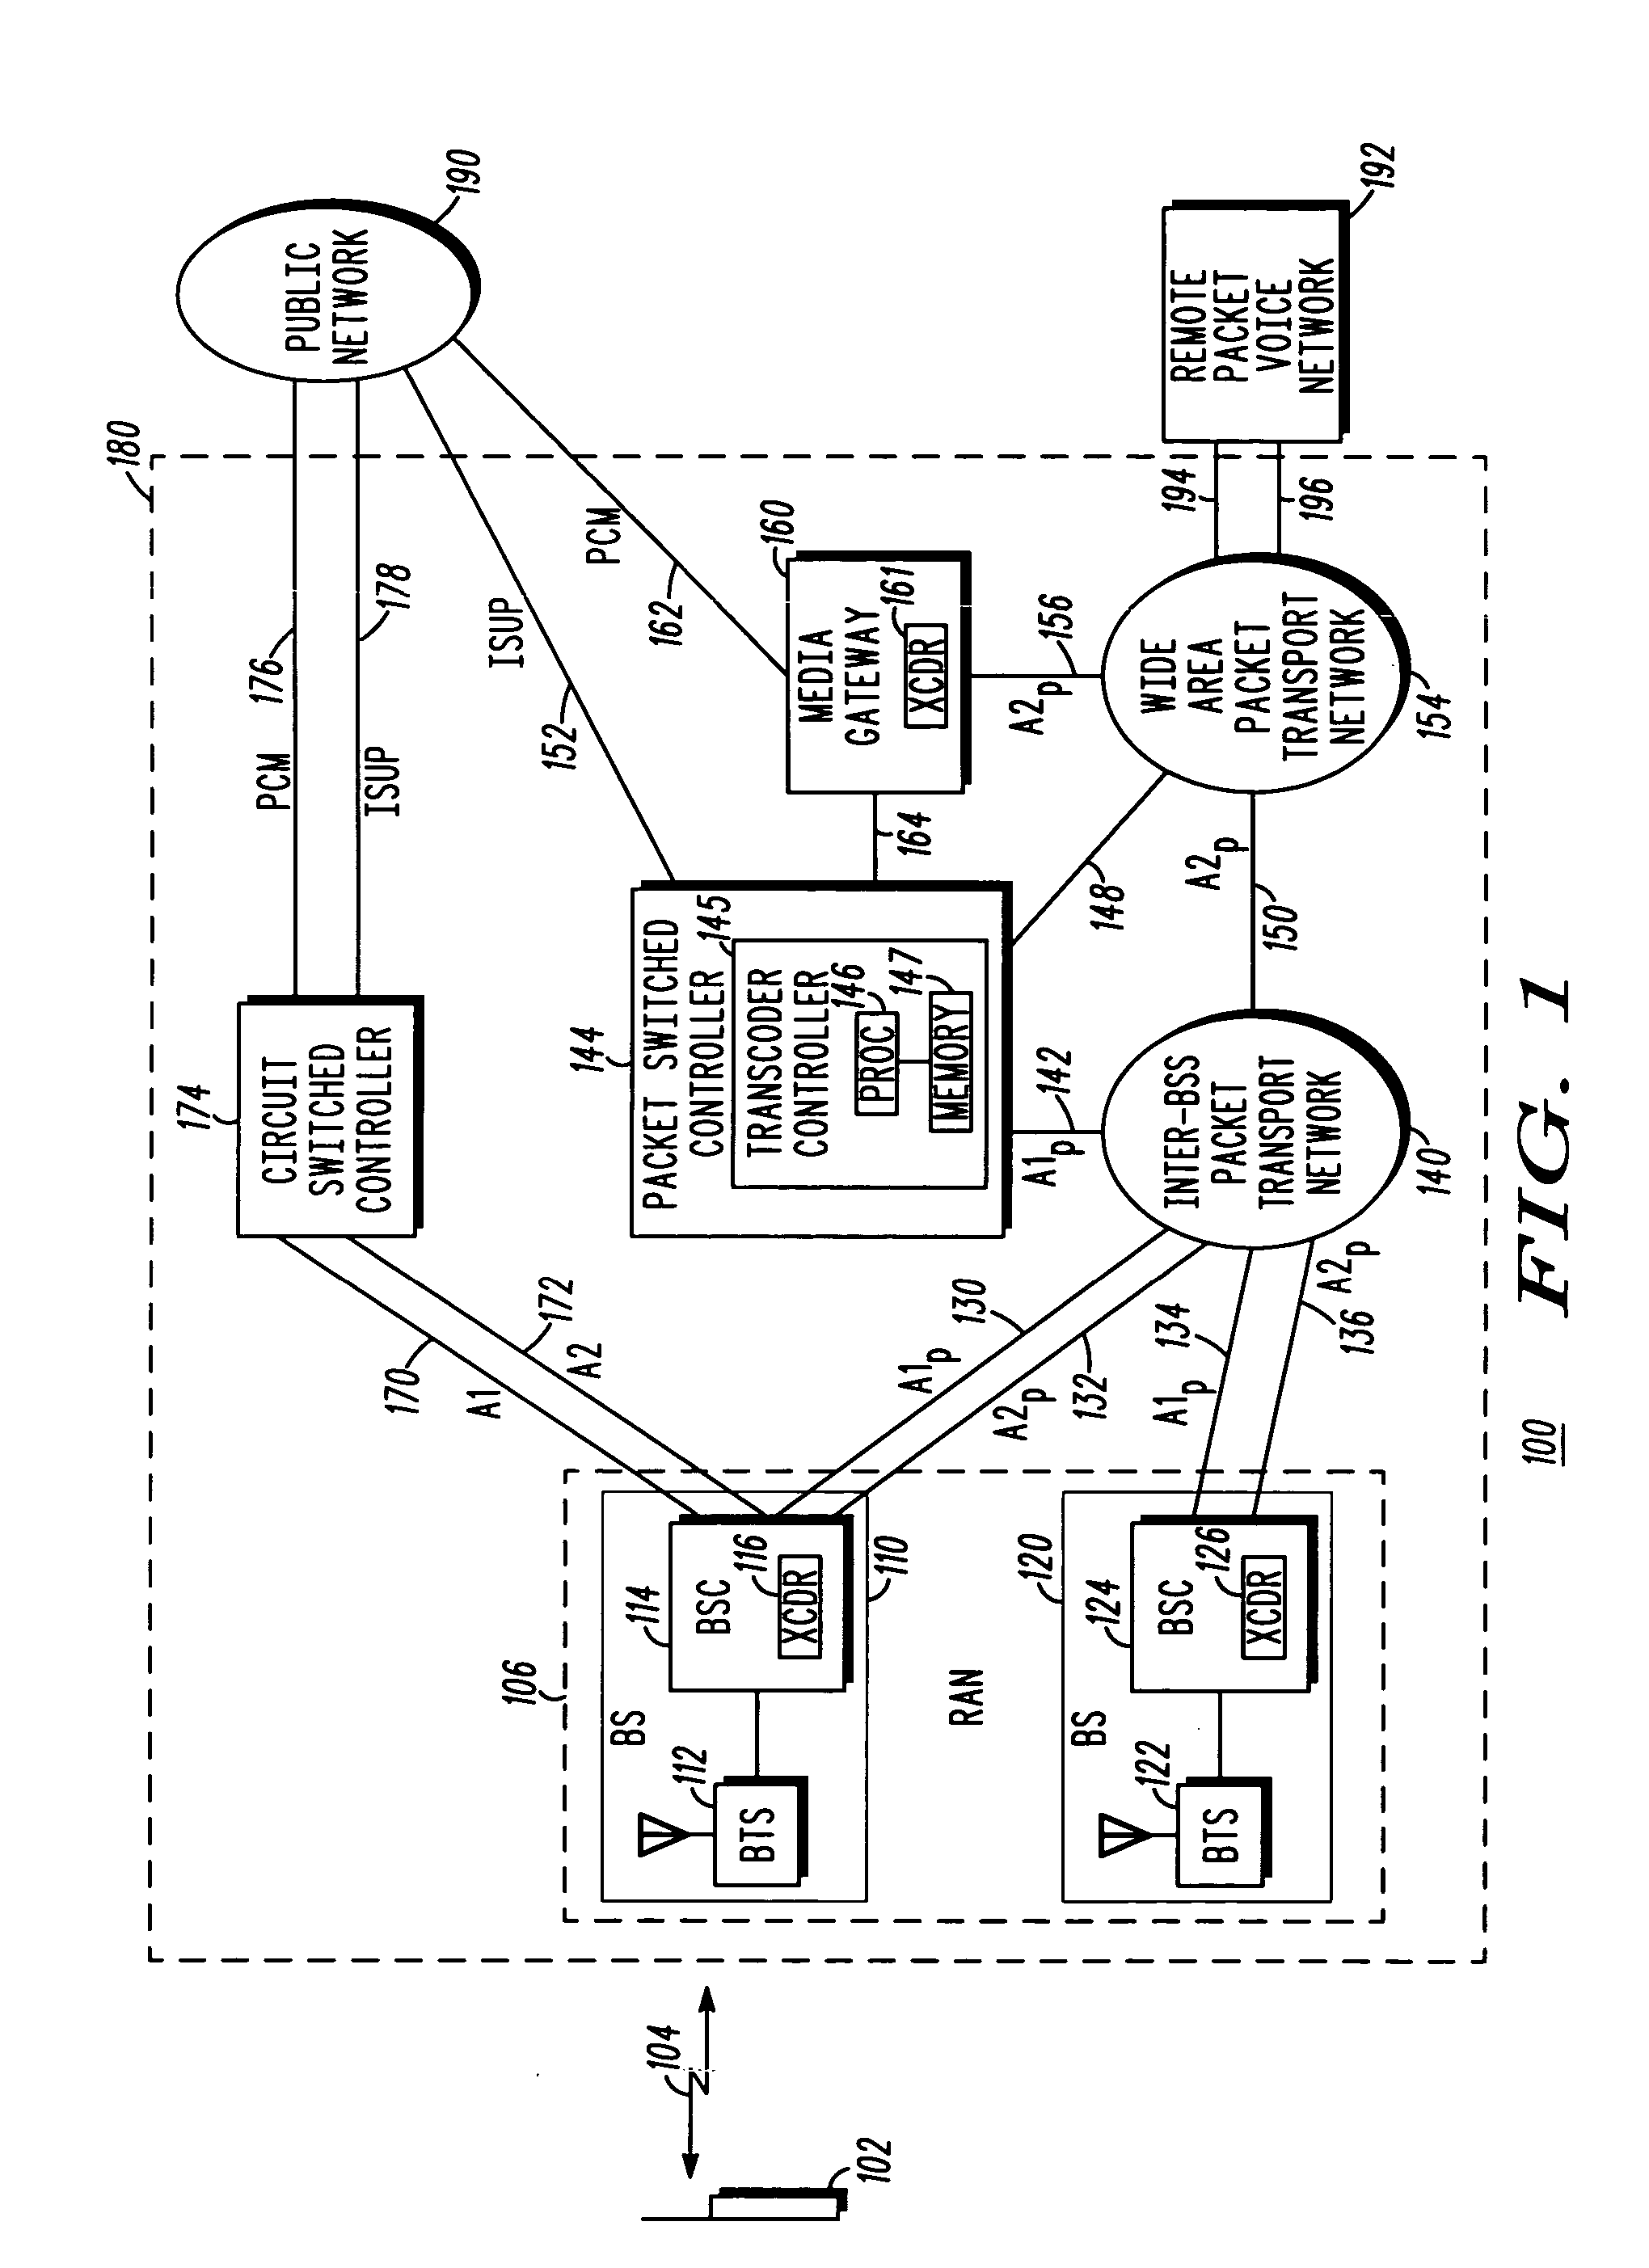 Method and apparatus for controlling distributed transcoders